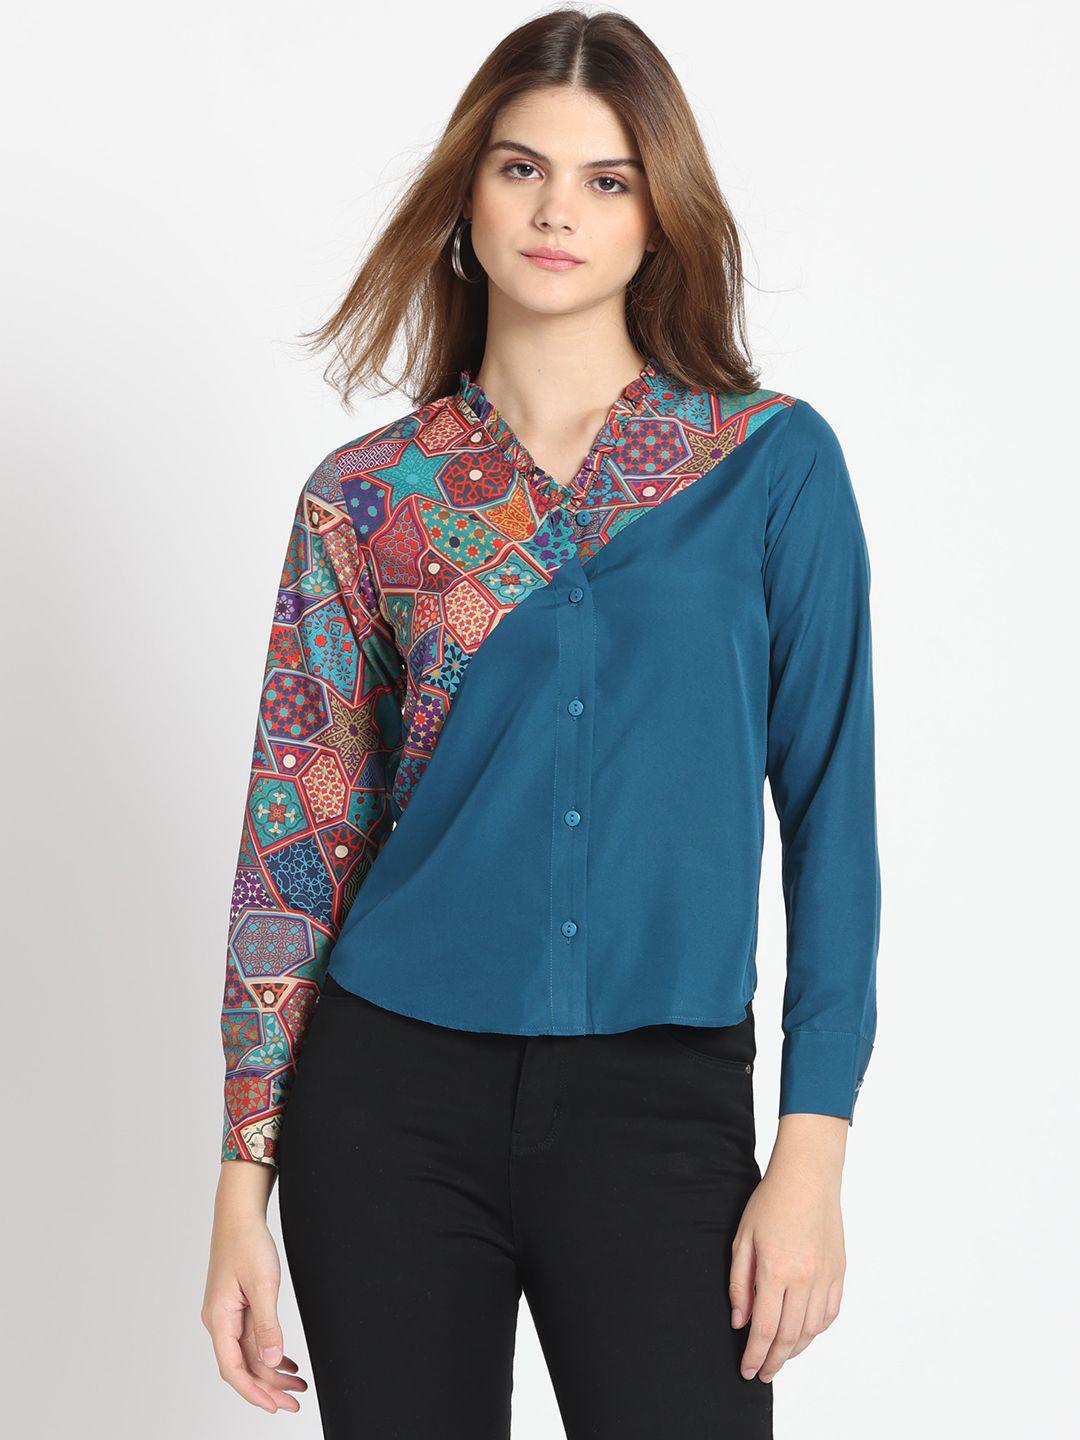 shaye smart floral printed v-neck long sleeves opaque casual shirt